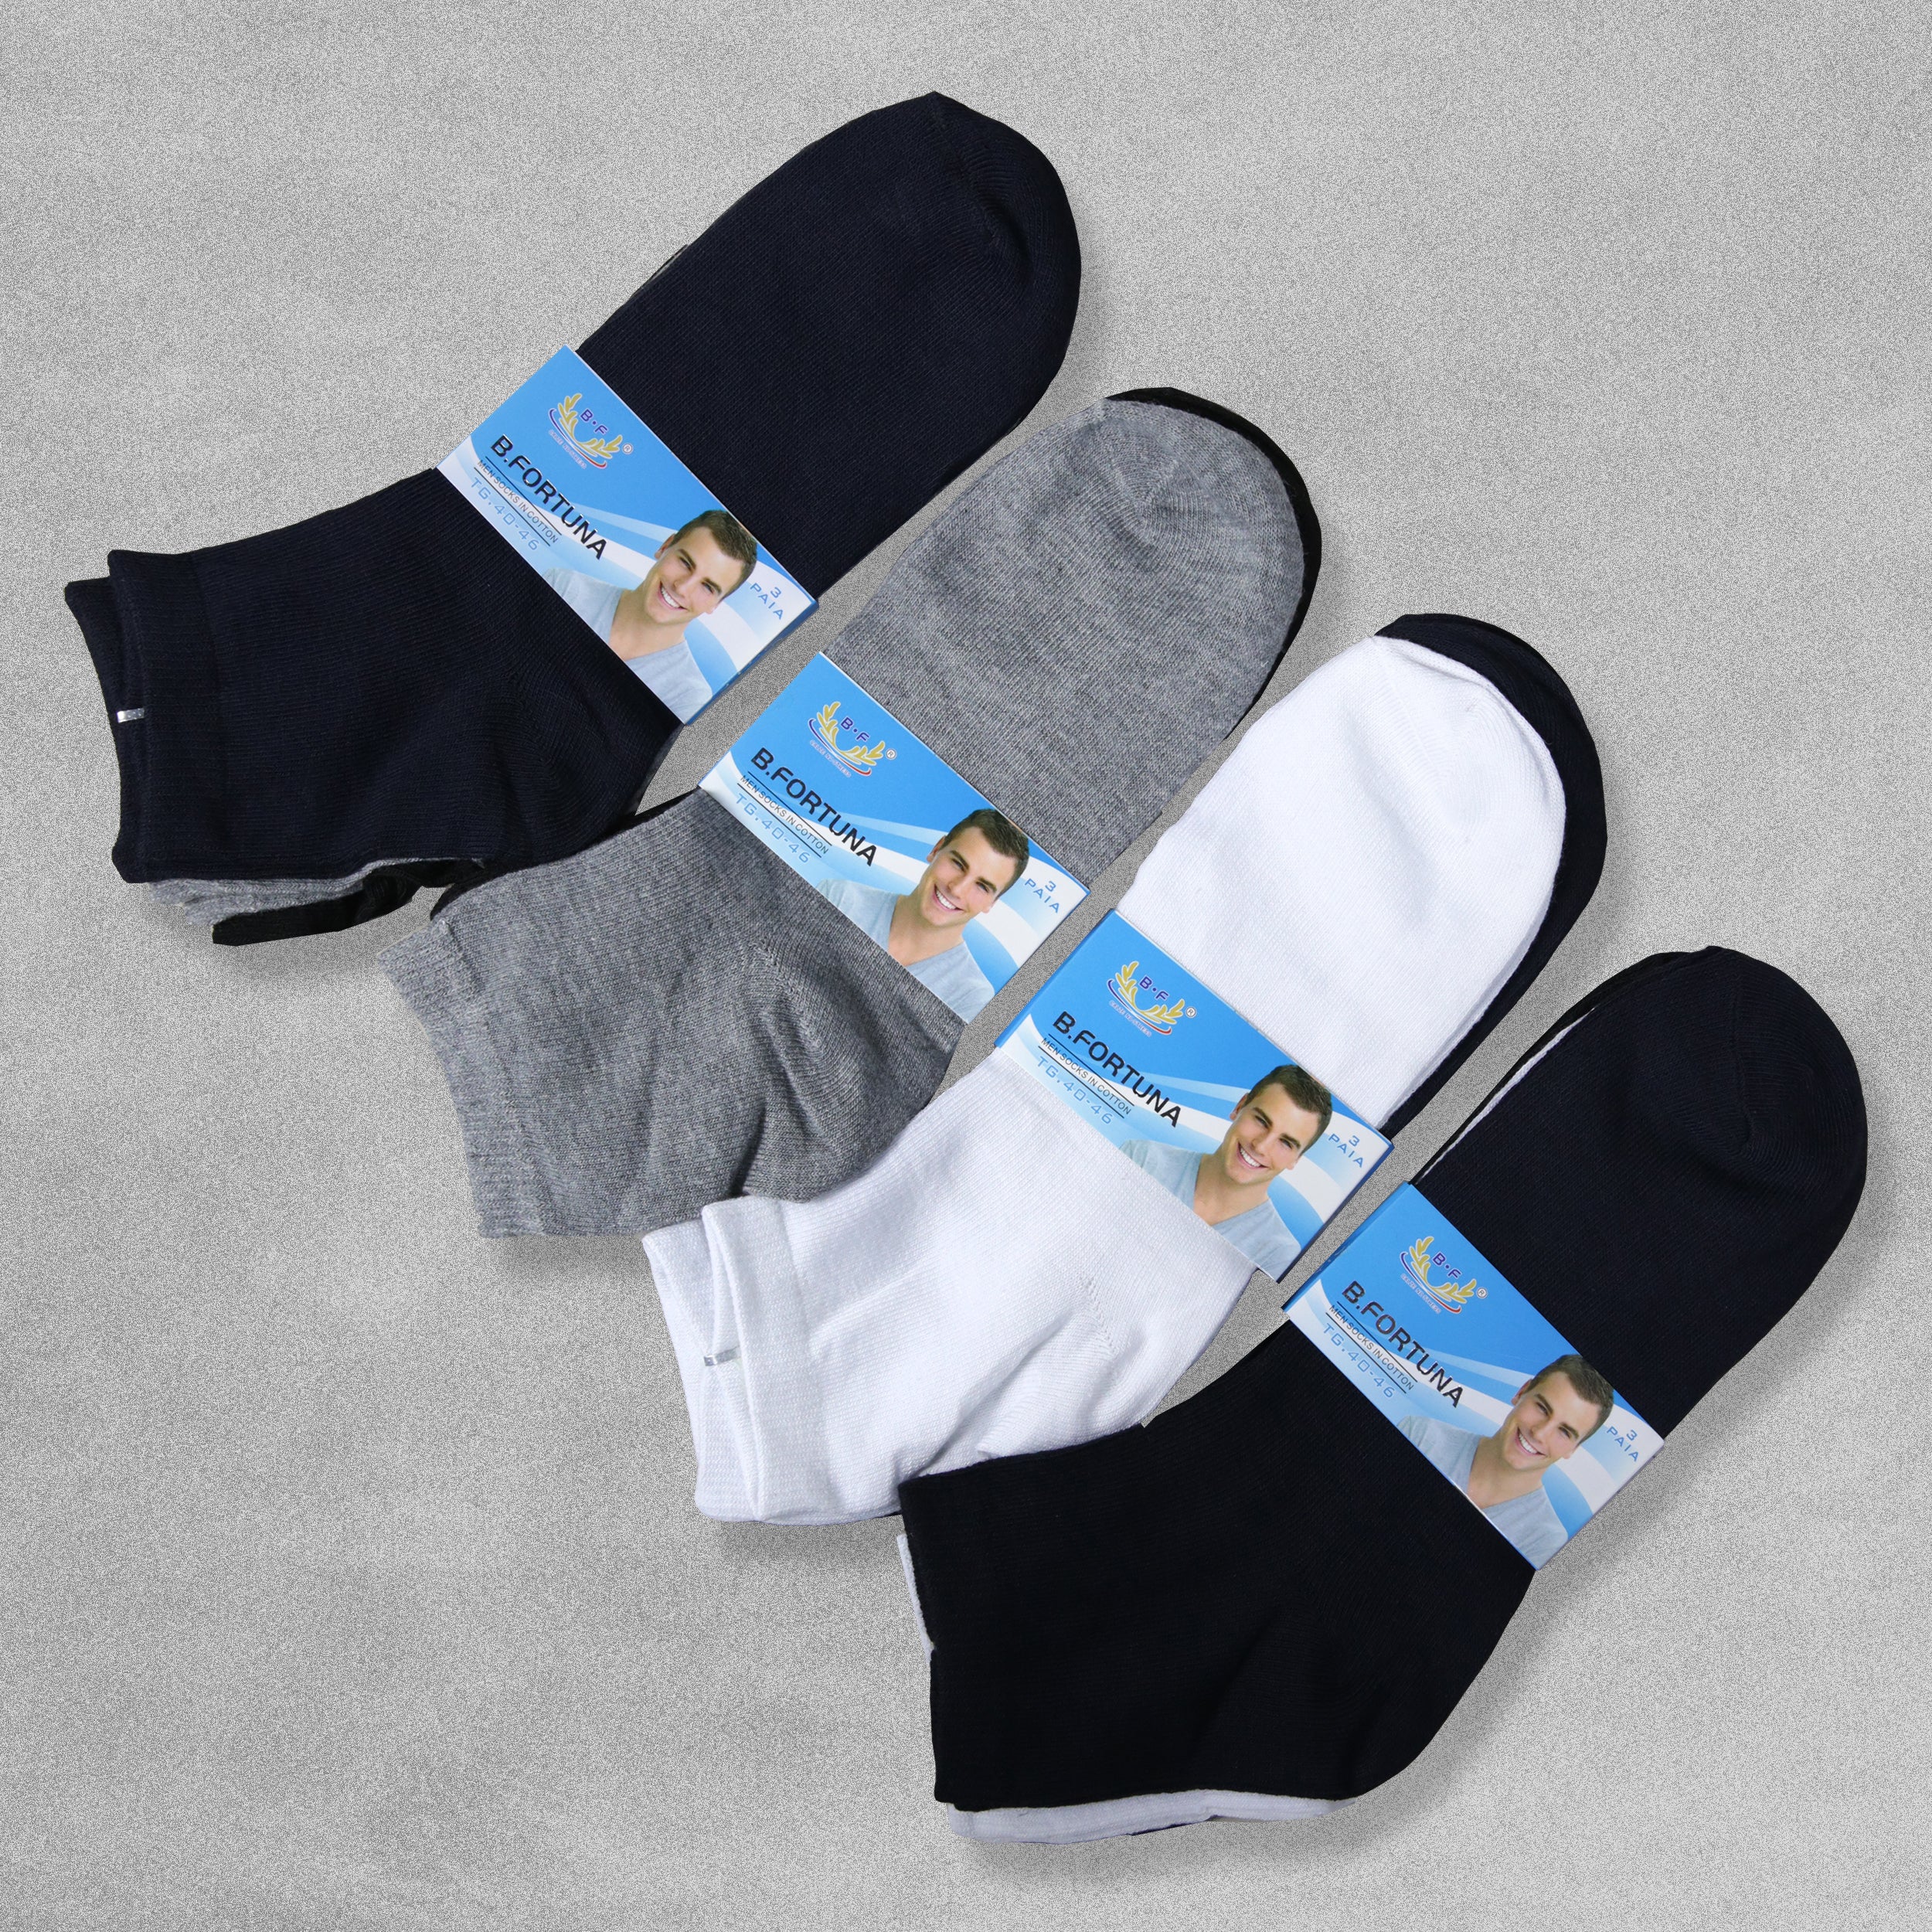 B.Fortuna Mens Socks Assorted Colours Size 40-46 (UK 7-11) - 3 Pairs